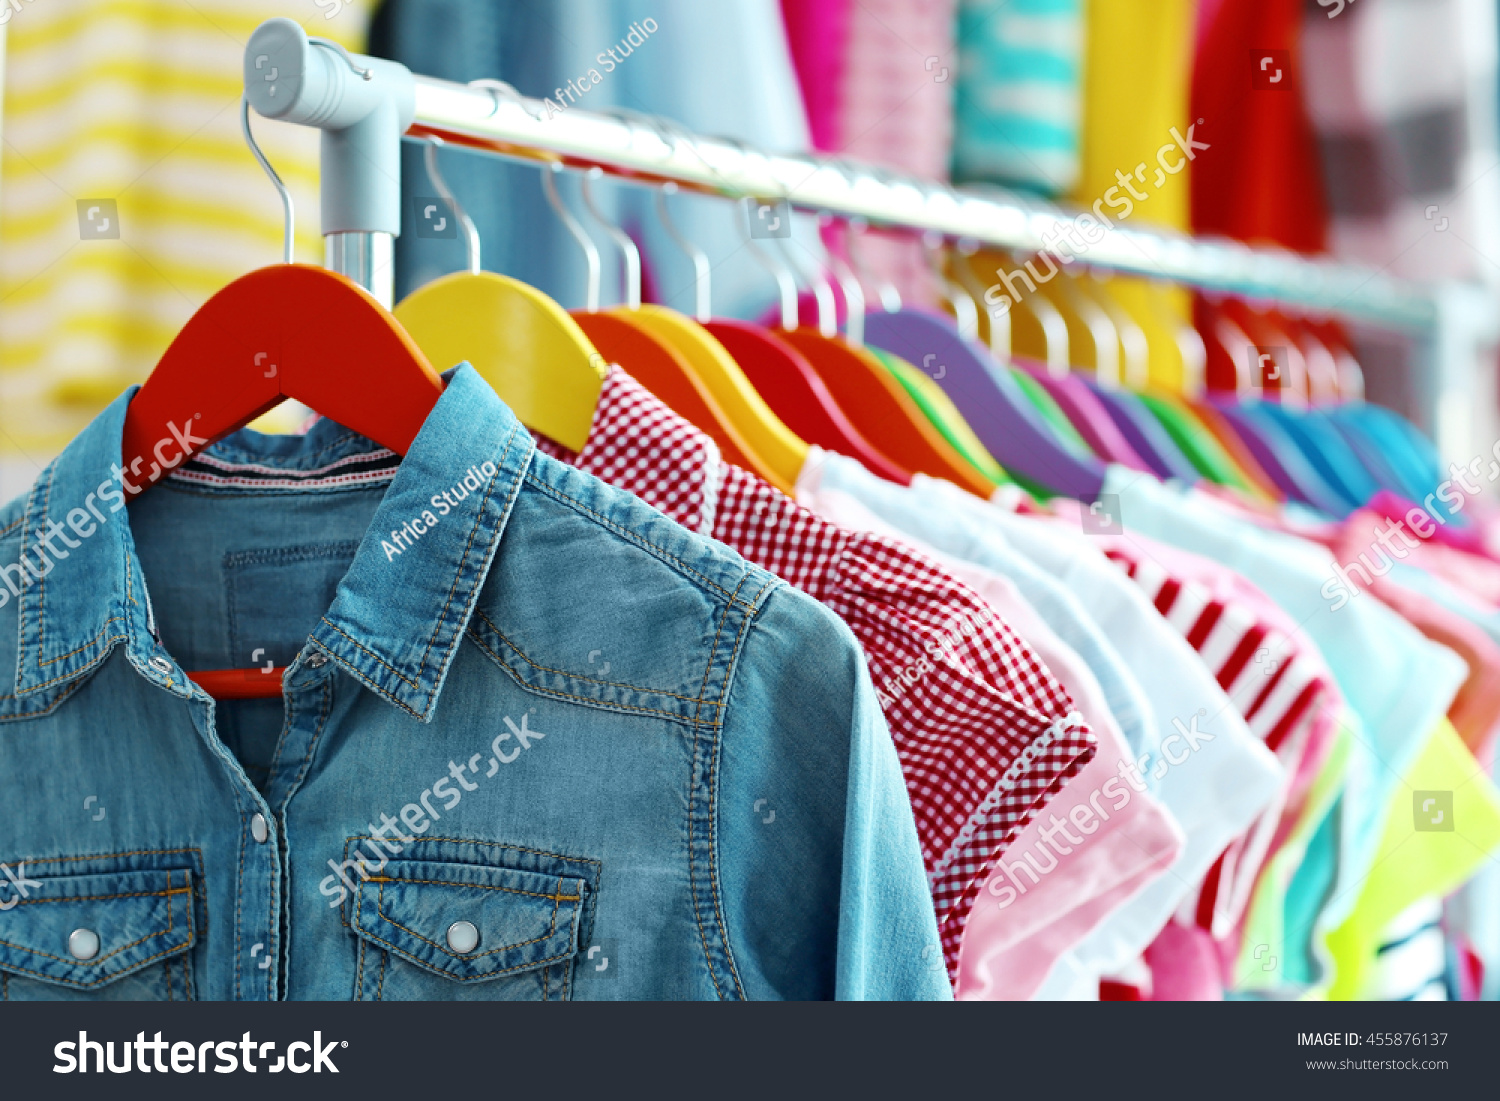 stock-photo-children-clothes-hanging-on-hangers-in-the-shop